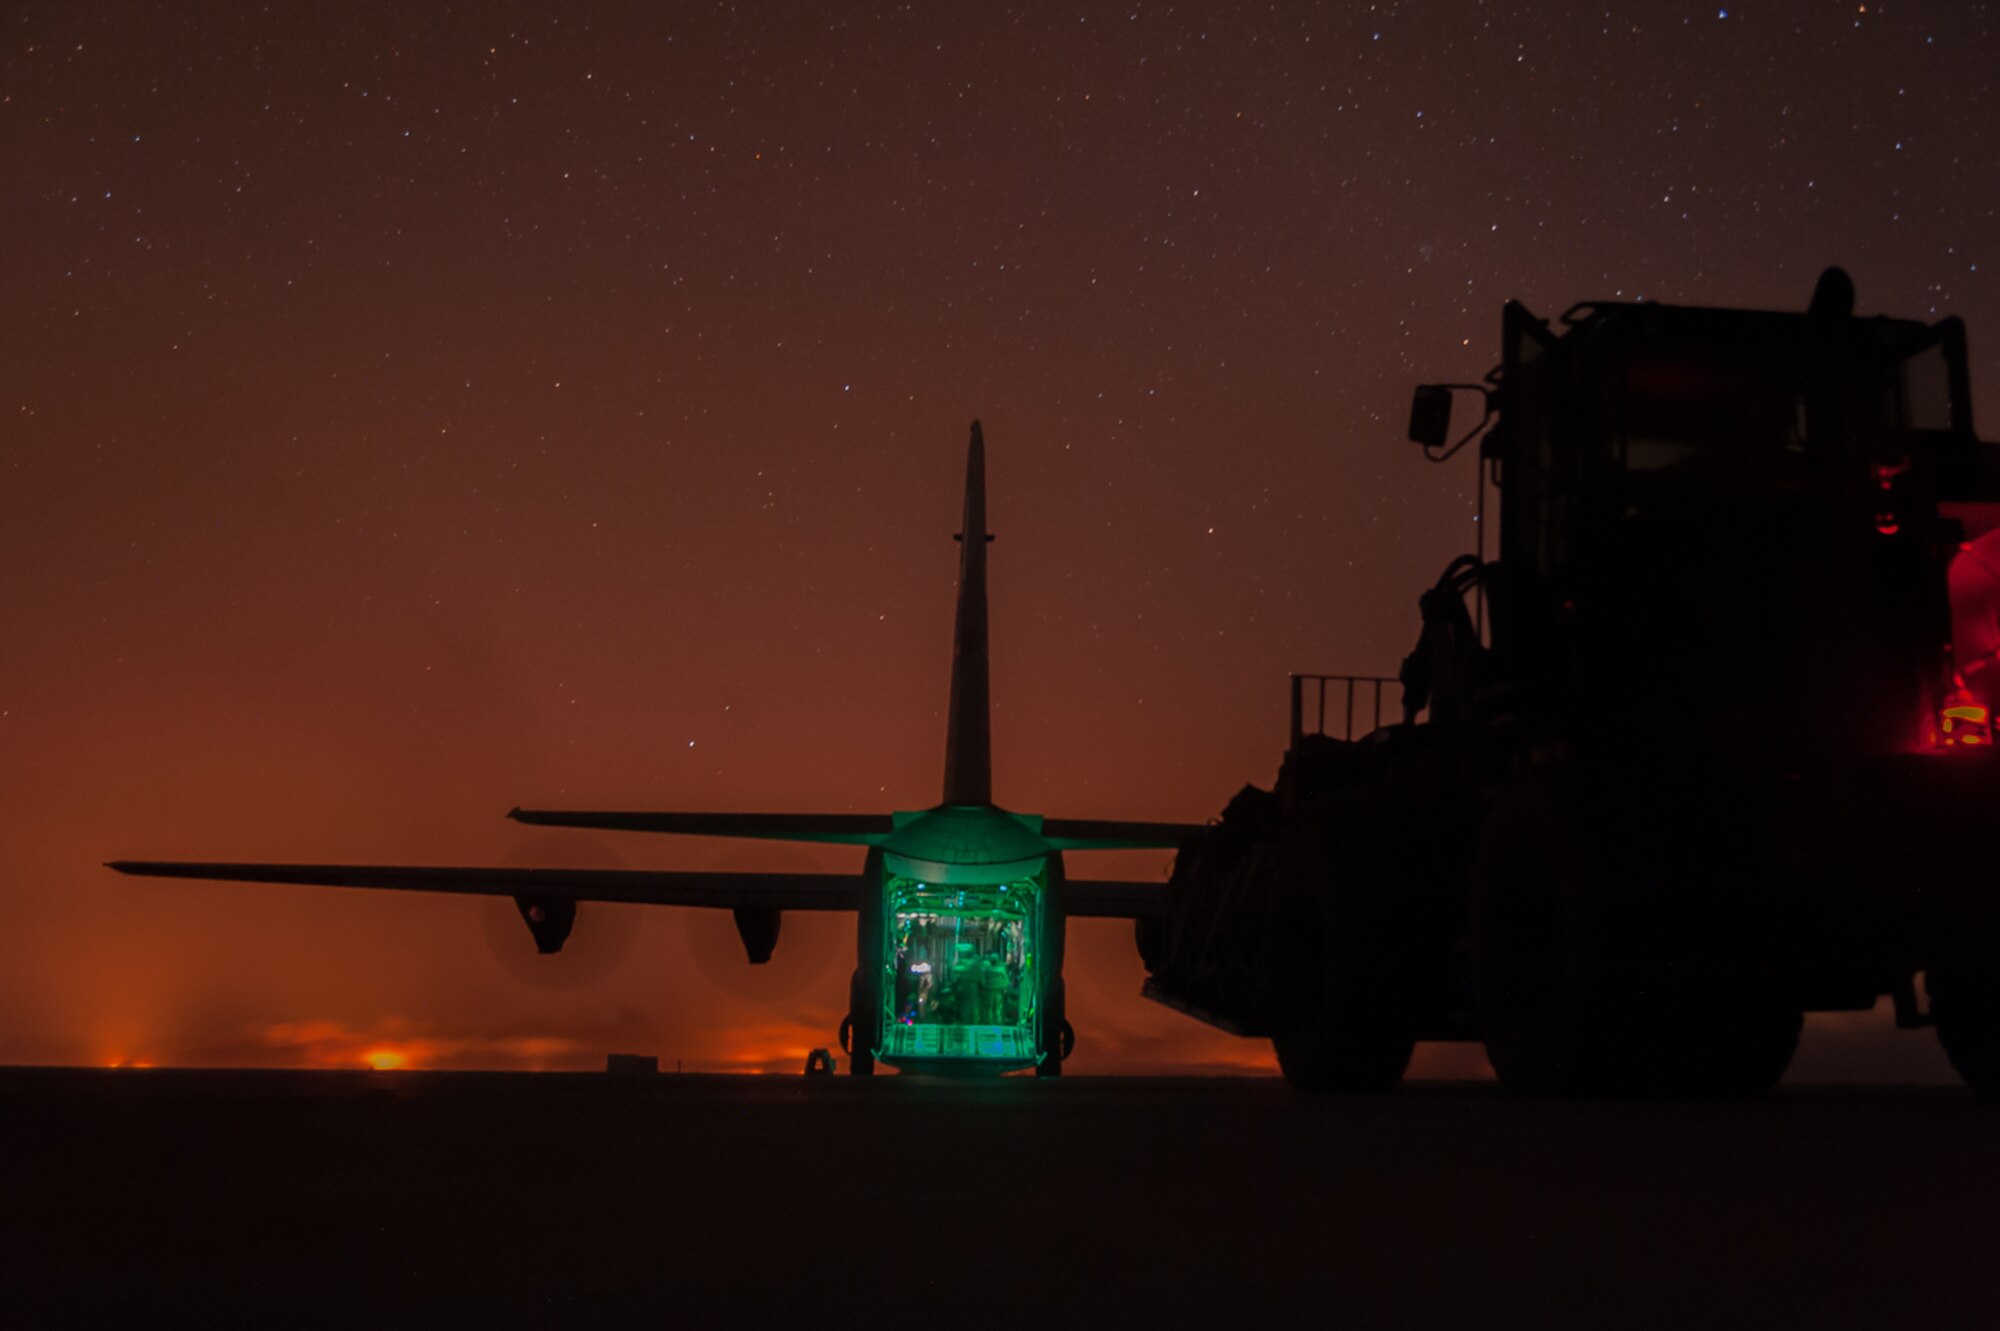 Airmen assigned to the 821st Contingency Response Group offload cargo from a C-130J Super Hercules at Qyarrayah West airfield, Oct. 28, 2016. The 821st CRG provides the core cadre of expeditionary command and control, airlift and air refueling operations, aerial port, and aircraft maintenance personnel for deployment worldwide as mobility control teams and airfield assessments teams. (U.S. Air Force photo by Staff Sgt. Adam Kern)